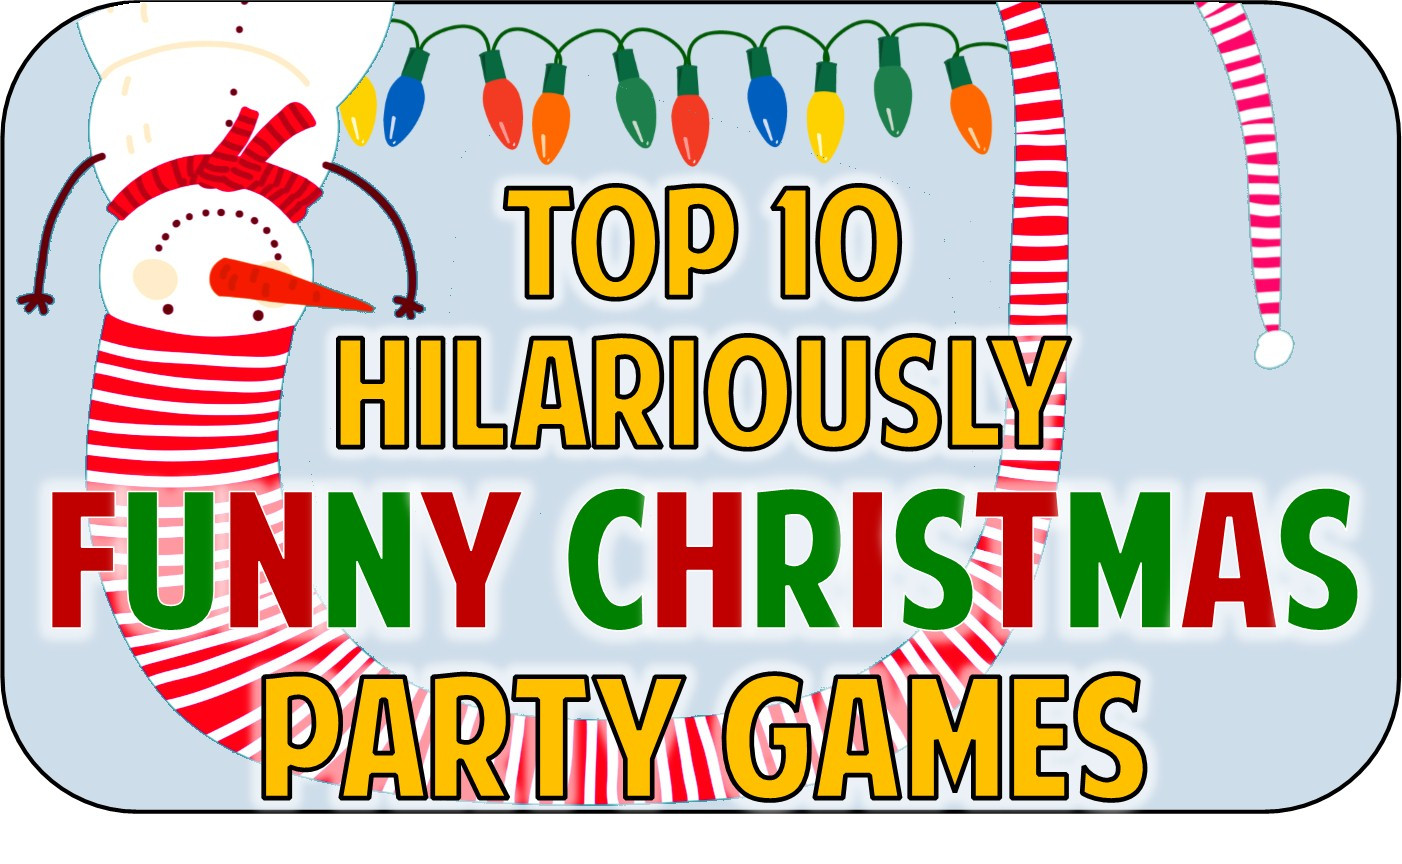 Christmas Party Themes Ideas For Adults
 Christmas Party fice Games